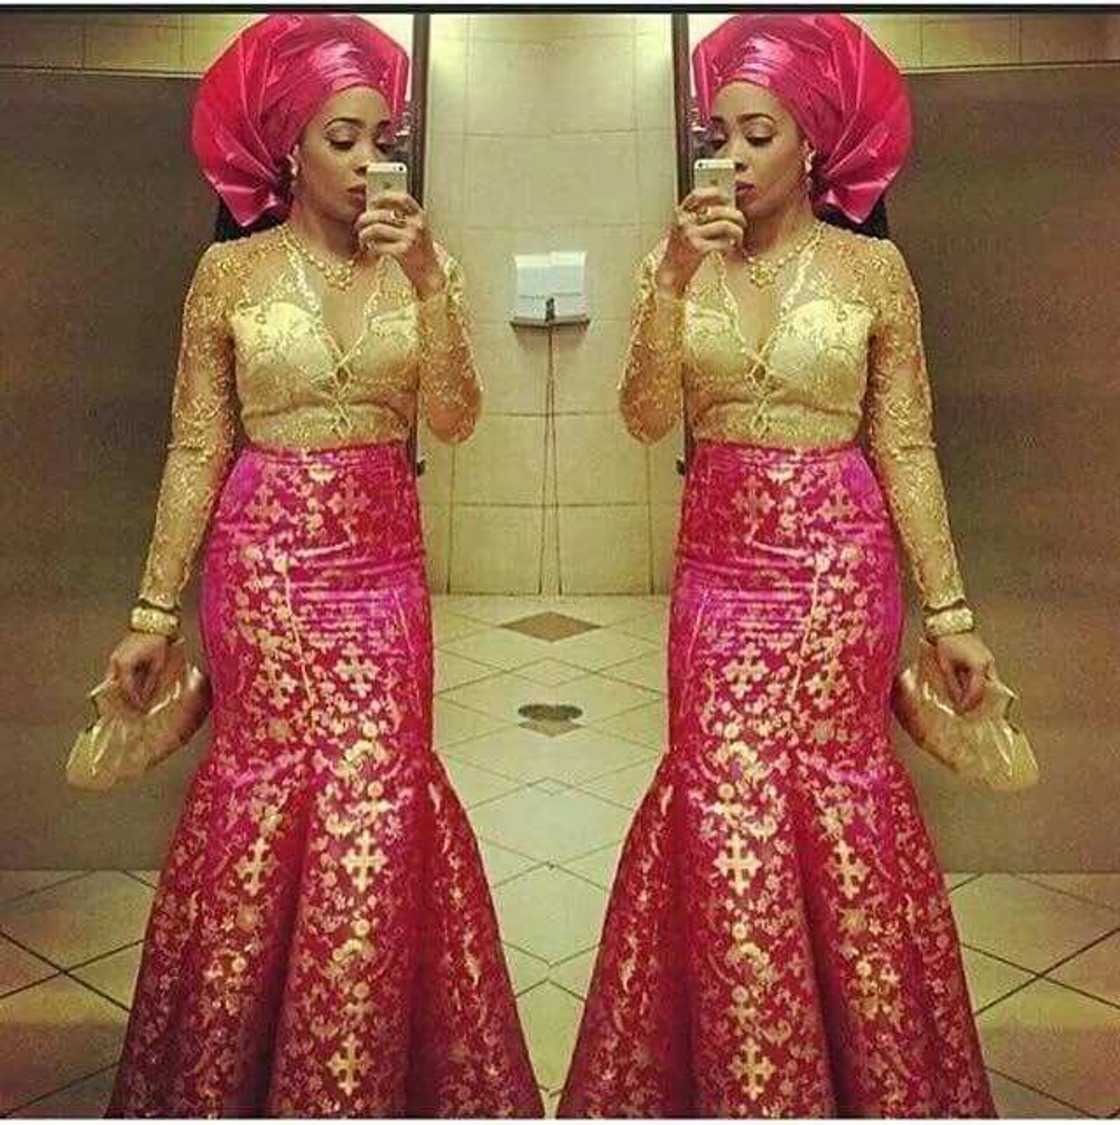 african dress styles for weddings
bridesmaid dress with different styles
maid of honour dresses